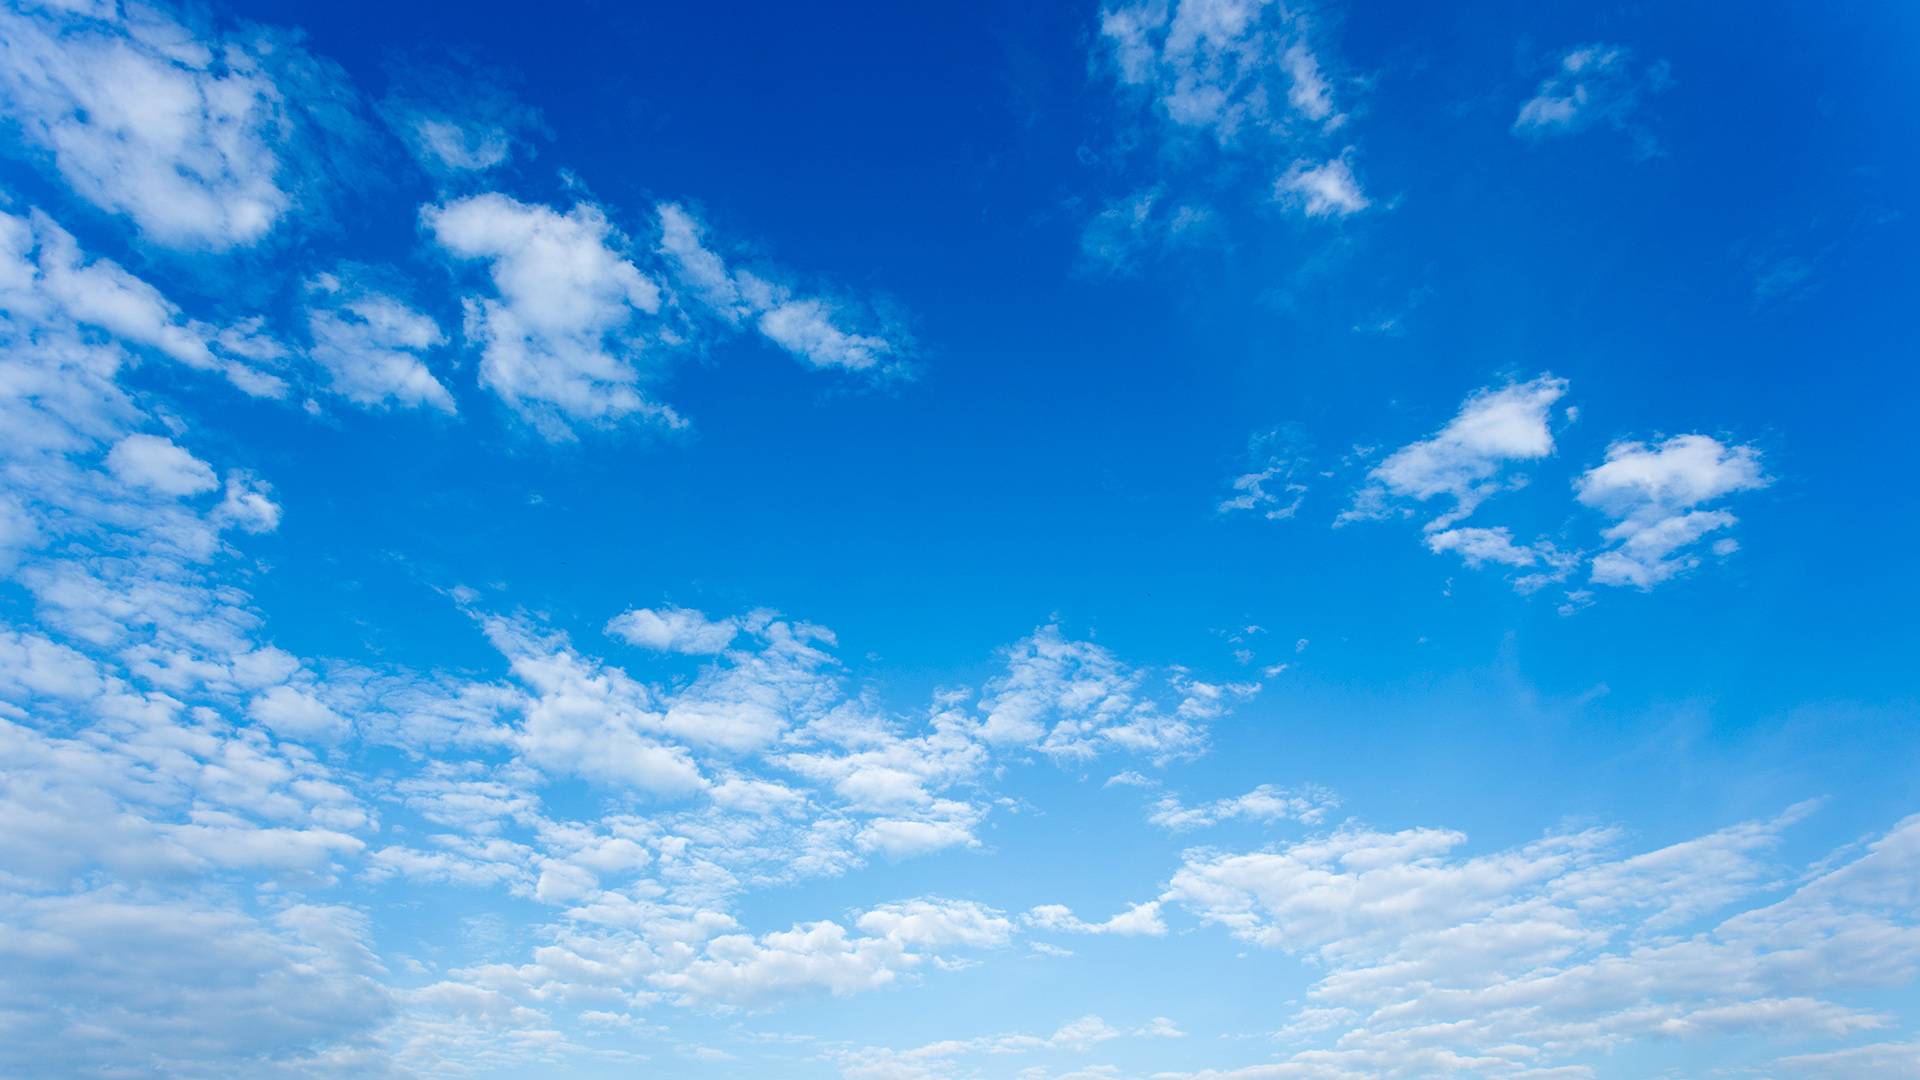 Birght blue sky with white clouds